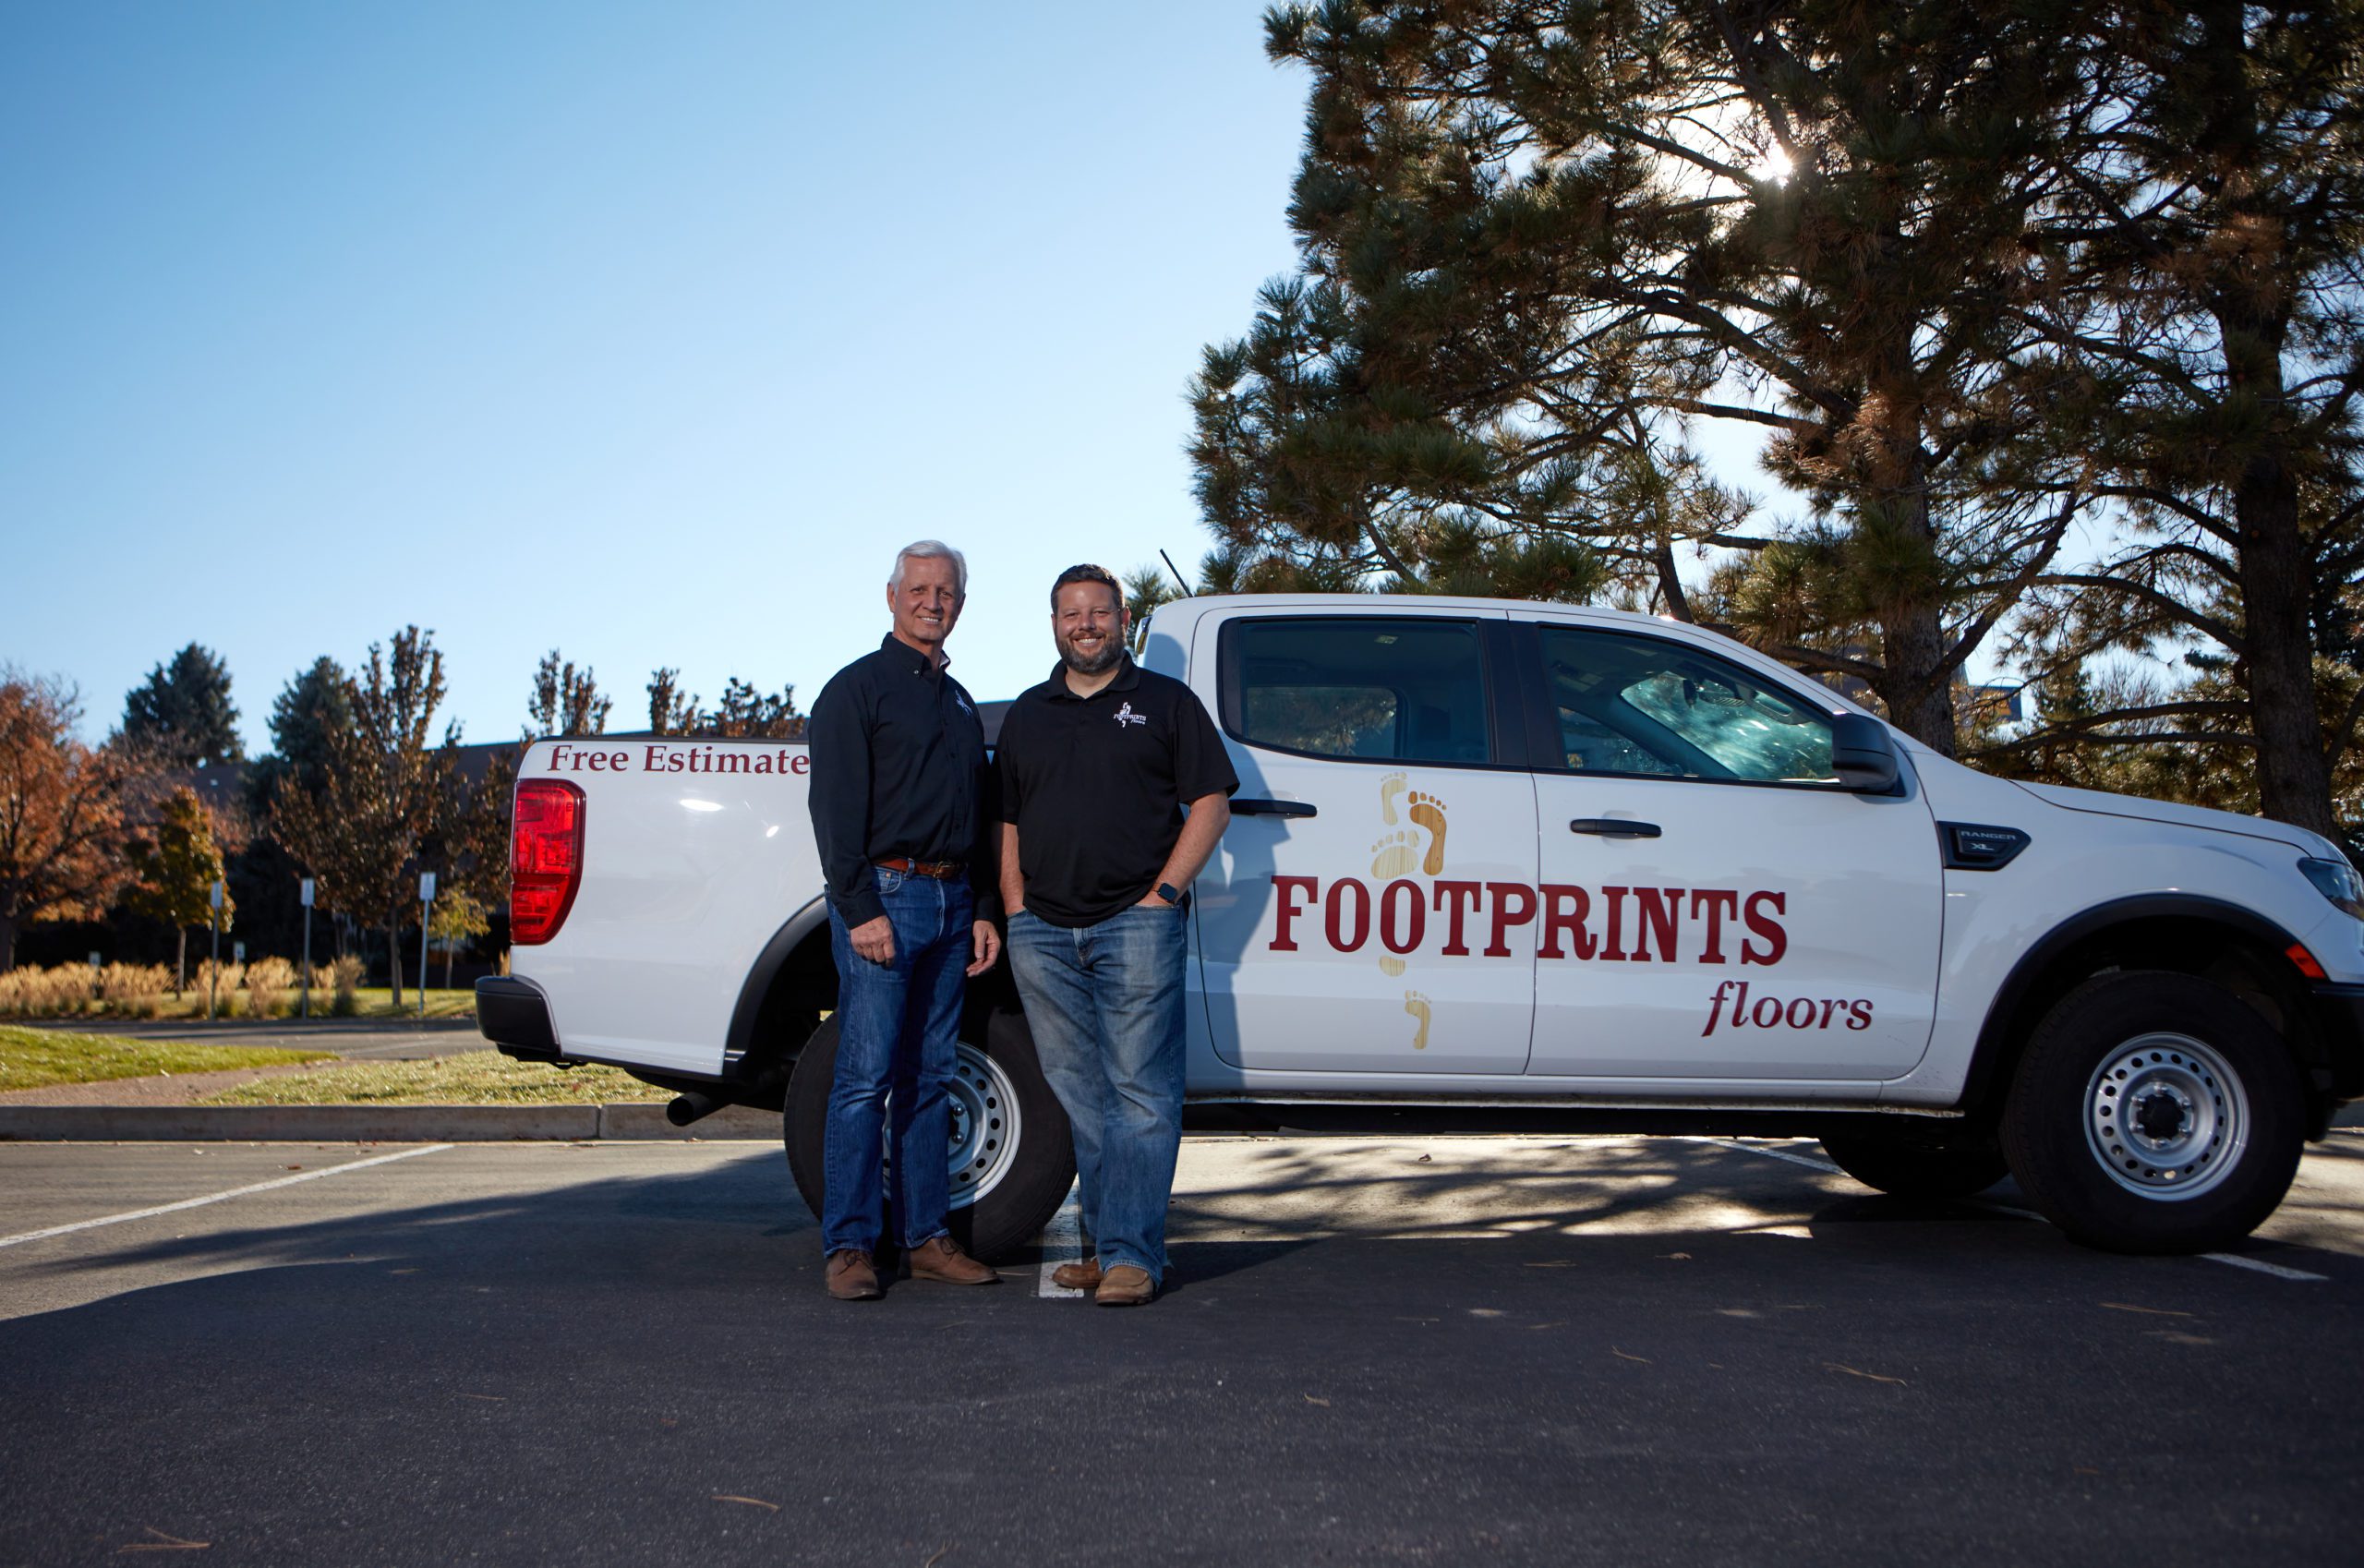 footprints floors franchise owners in front of truck